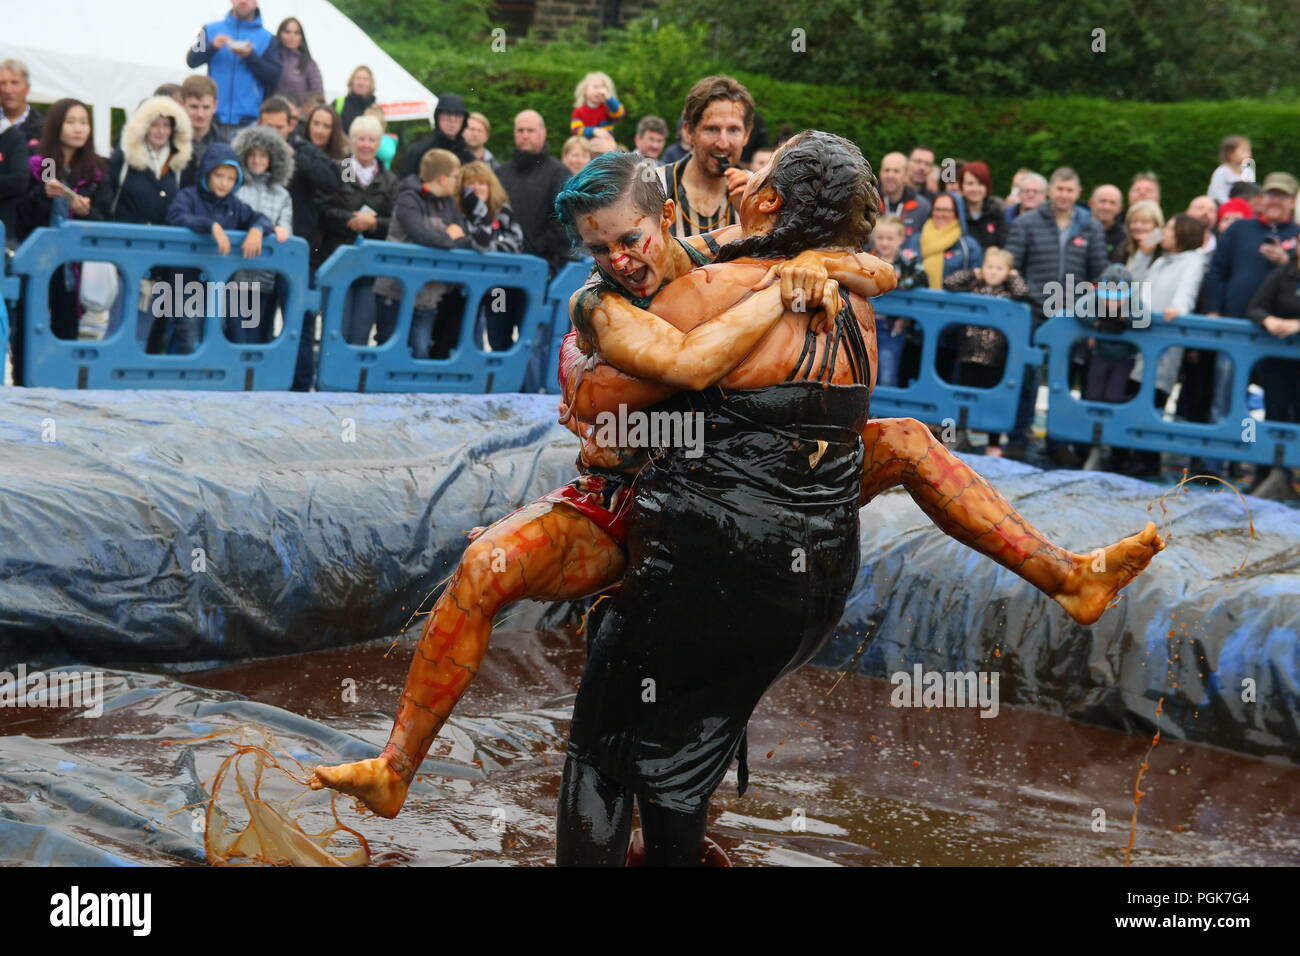 Stacksteads, Bacup, Lancashire, UK. 27 August 2018.The  World Gravy Wrestling Championships at the Rose ‘n Bowl, Stacksteads to raise funds for the East Lancashire Hospice and competitors nominated charities.     A wild and whacky wrestling competition in a 16,000 litre pool full of Lancashire Gravy! All our contestants get sponsorship and really give it their all to raise Credit: Phil Taylor/Alamy Live News Stock Photo